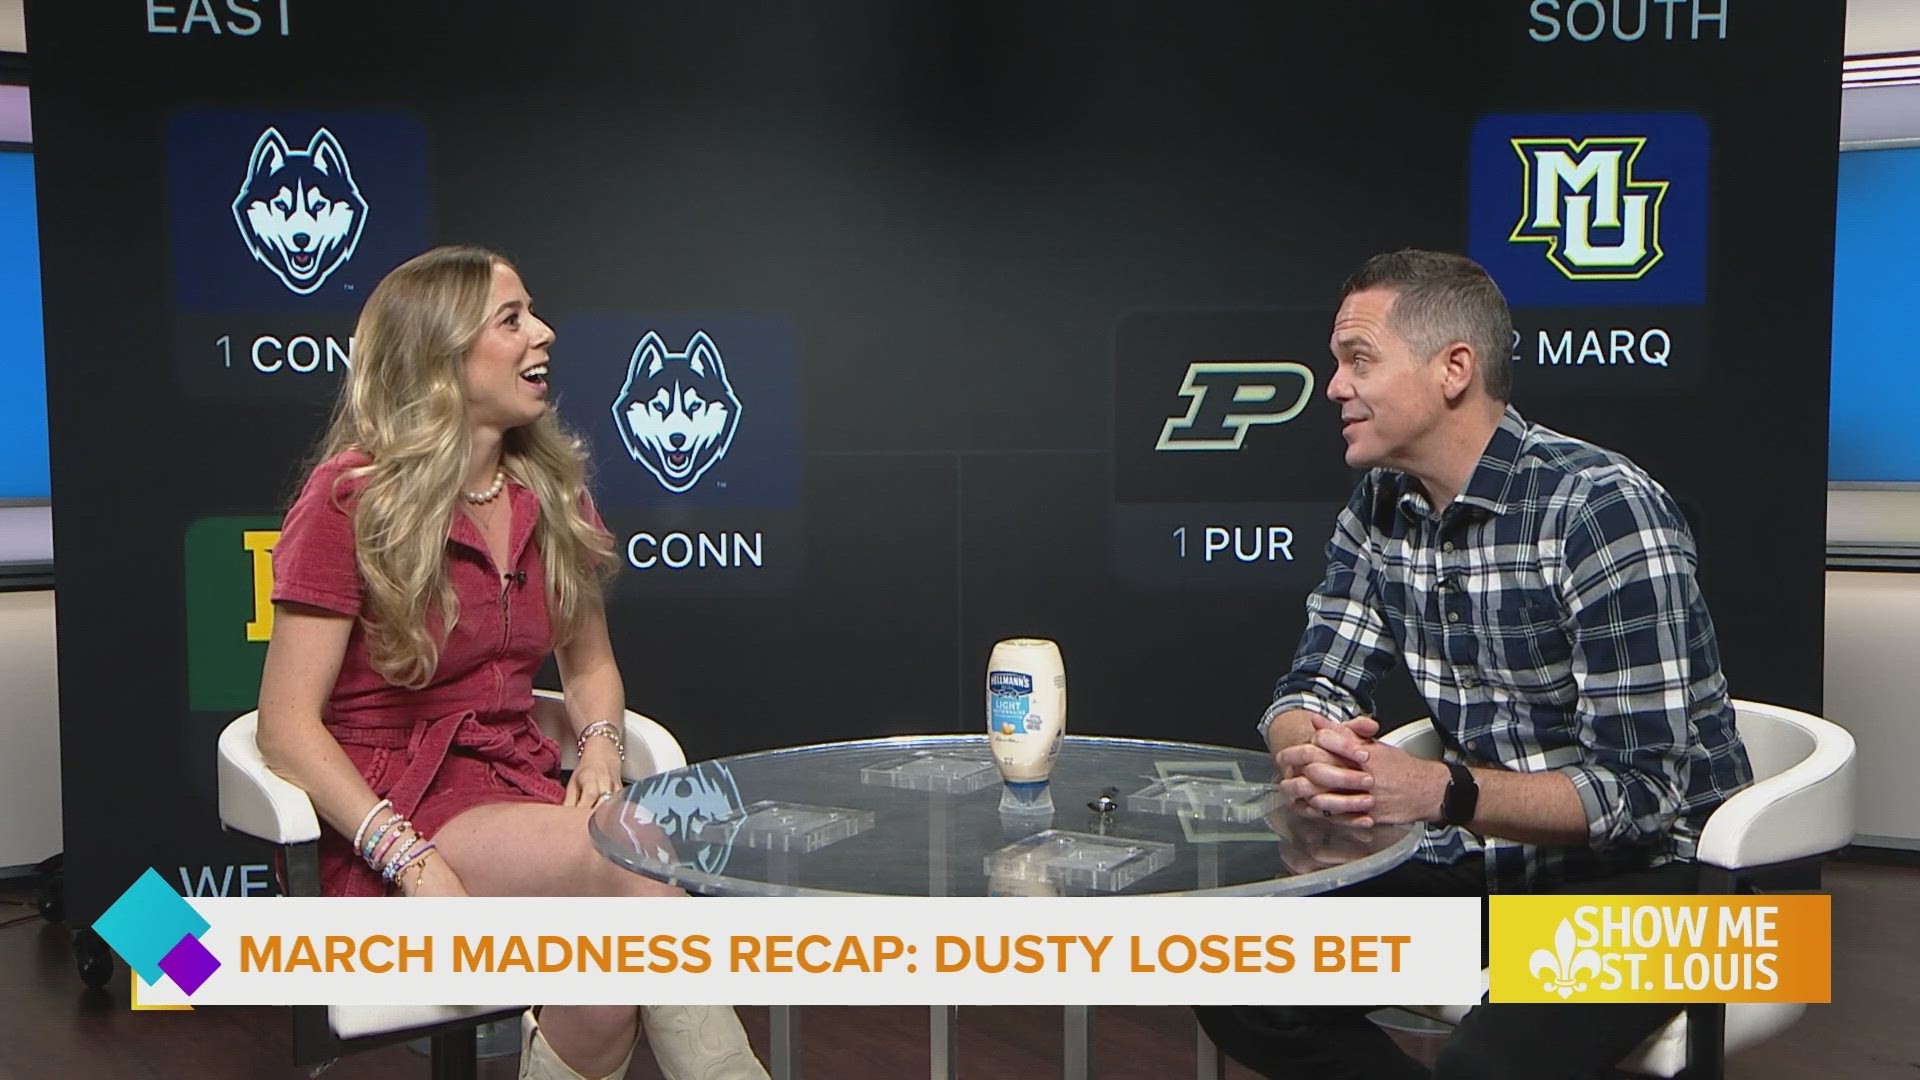 A bet's a bet and Dusty must pay up after his bold prediction when creating brackets for March Madness.